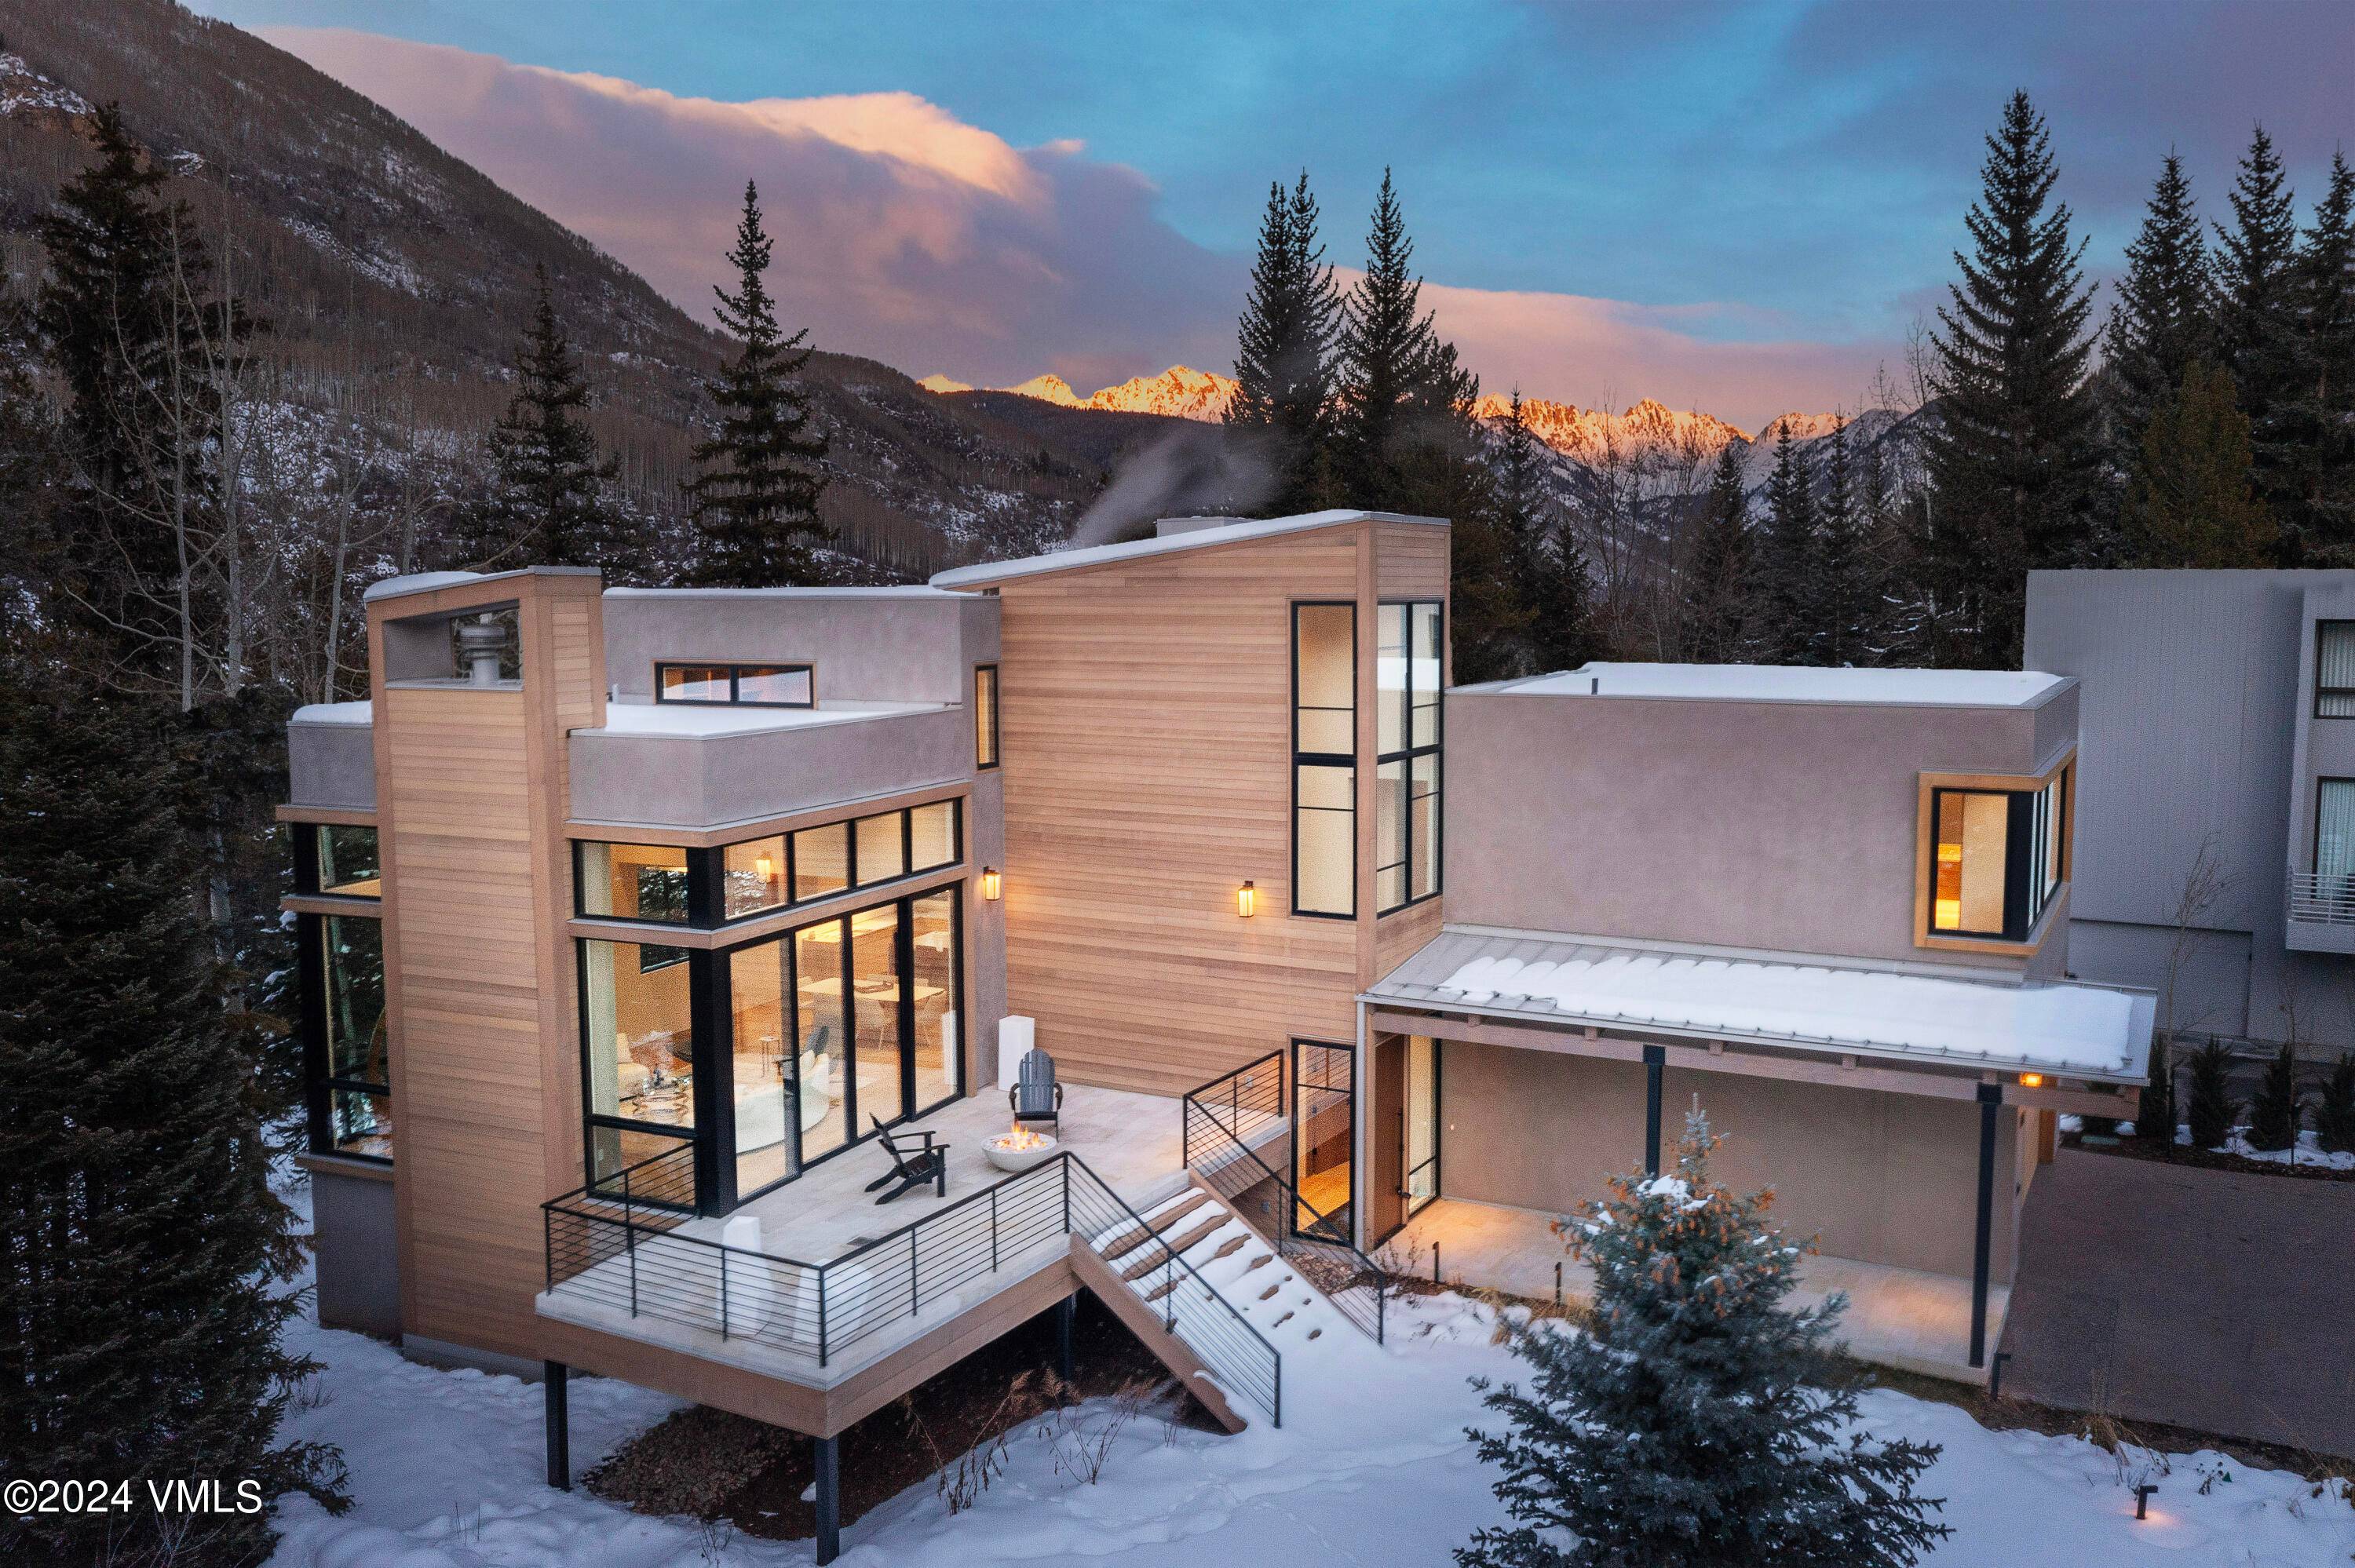 Located on the Vail Golf Course and a short walk to Vail Village, Ford Amphitheater, and ski slopes, this single family home boasts southern mountain and Gore Range views.